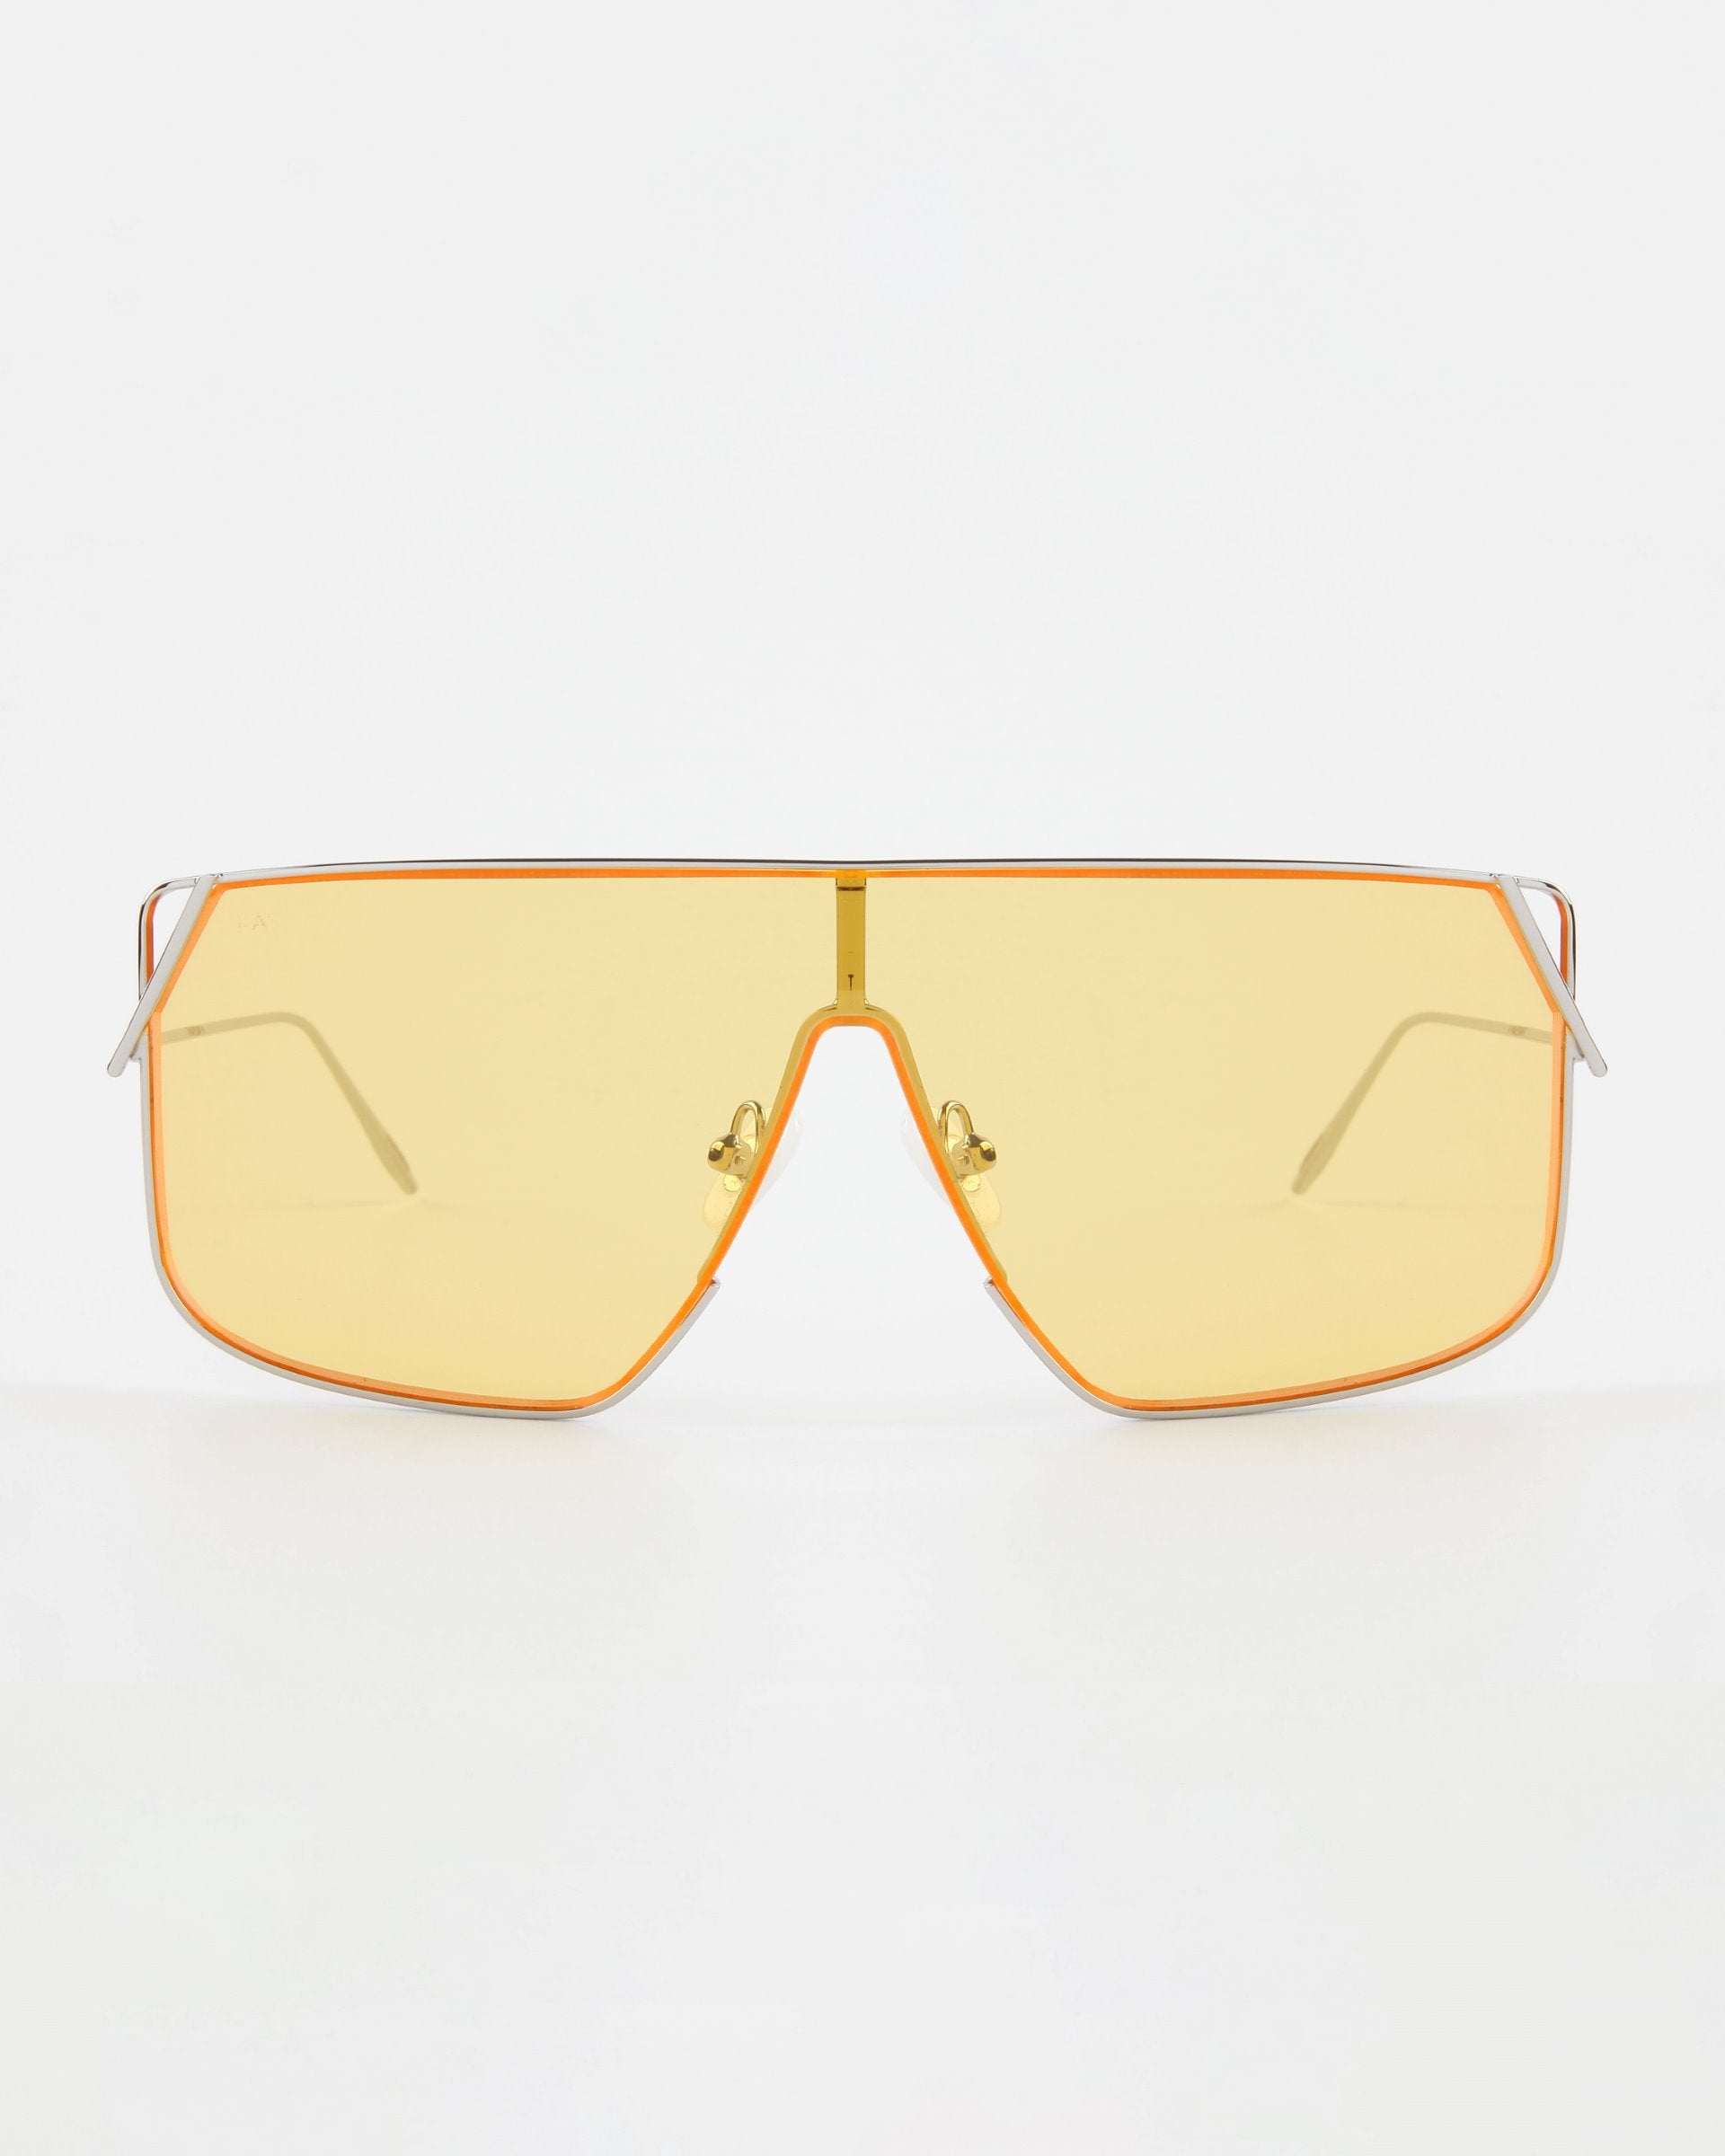 A pair of Horizon sunglasses from For Art&#39;s Sake® with large, yellow-tinted lenses. The lenses are enclosed in a thin, orange frame featuring a gold-tone bridge and adjustable nose pads. Slim stainless steel arms complement the bold design, while offering UVA &amp; UVB protection for your eyes.